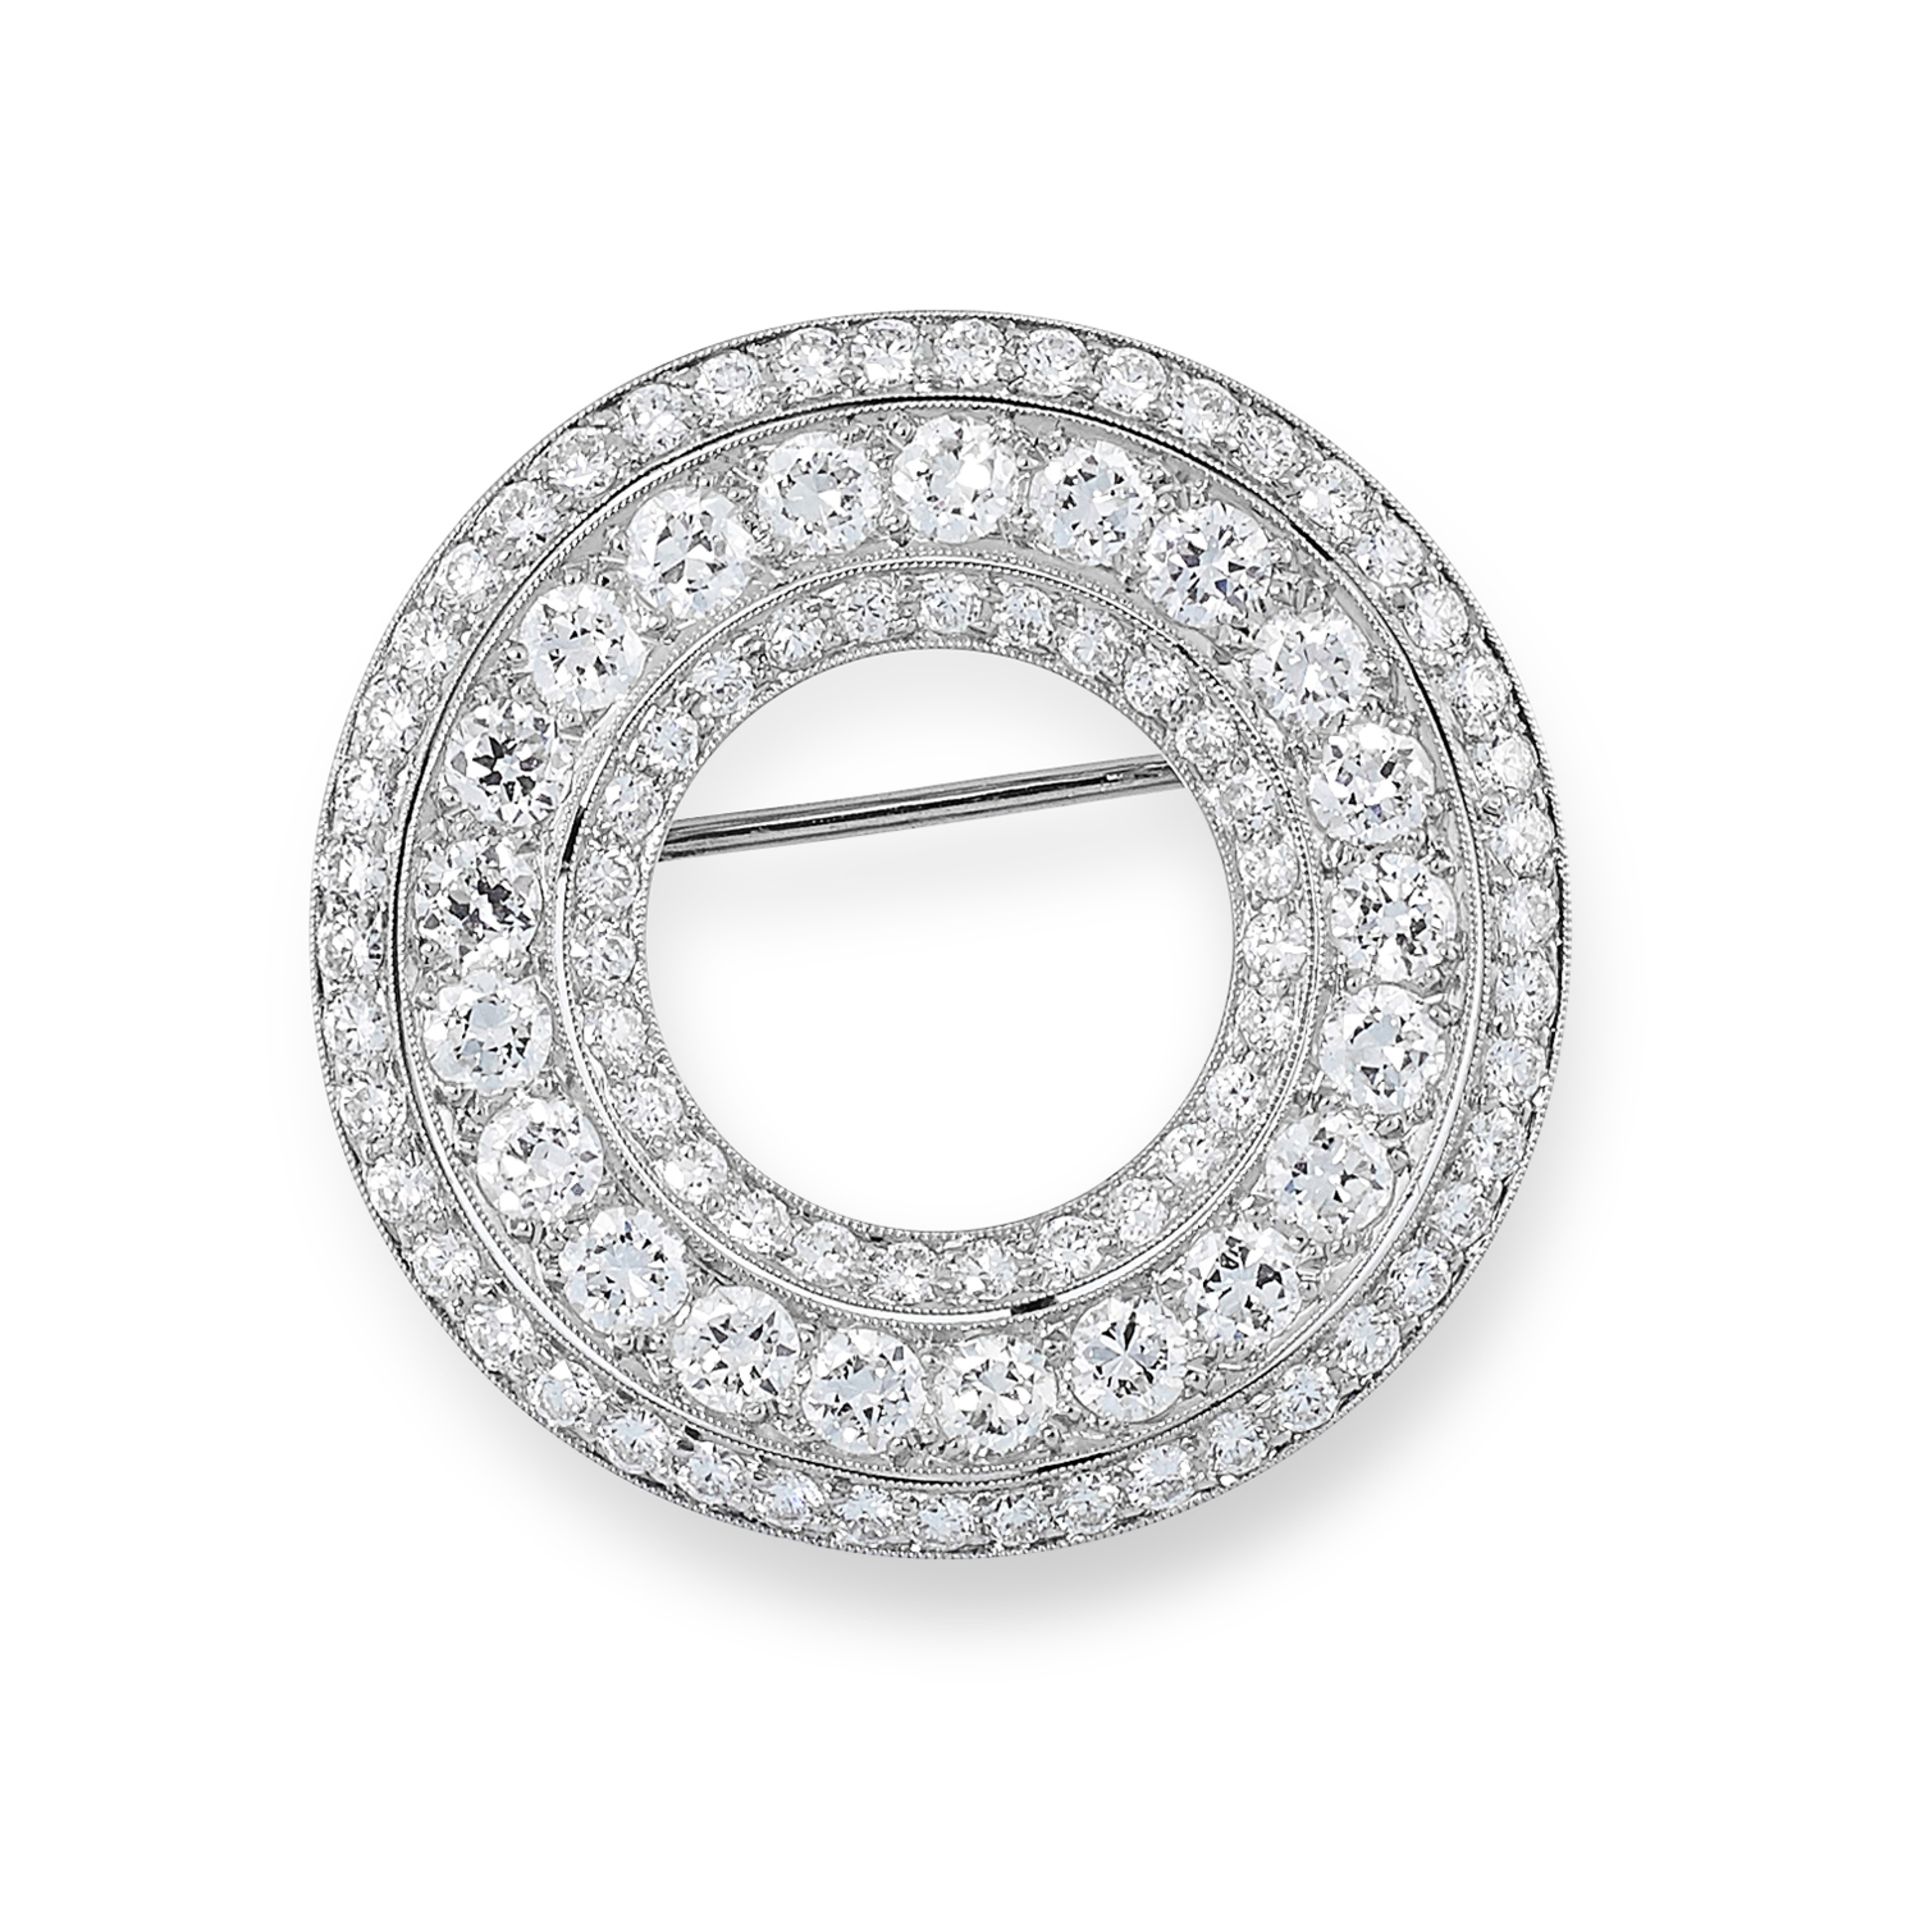 A DIAMOND BROOCH, CARTIER designed as an open circle with three rows of round cut diamonds, signed